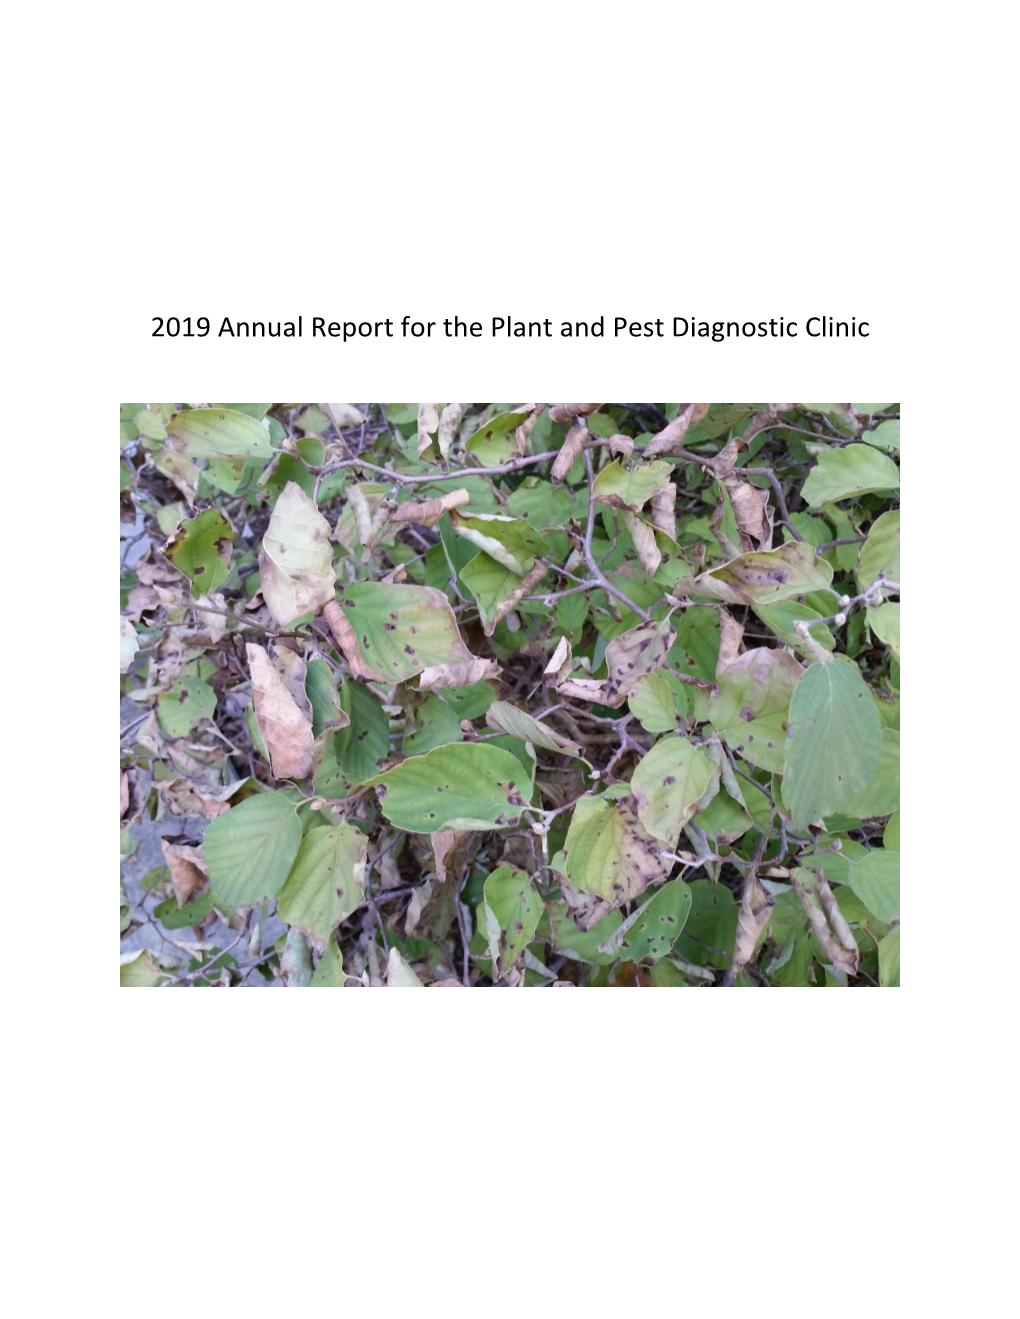 2019 Annual Report for the Plant and Pest Diagnostic Clinic